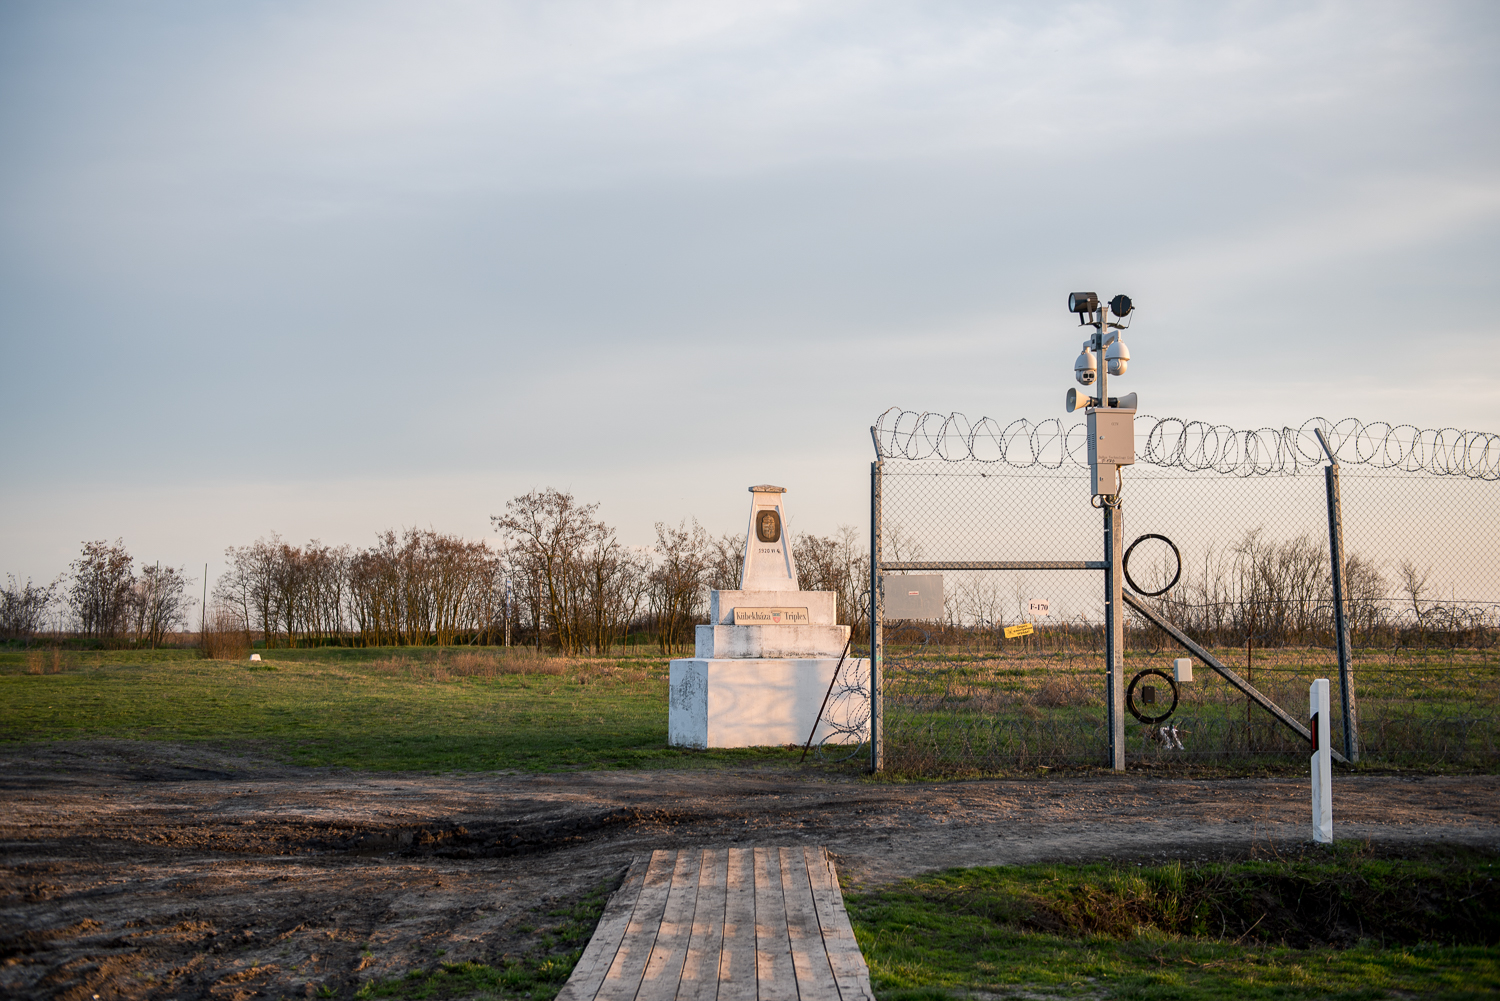  Trianon memorial at the end of the Hungarian border barrier near the triple border of Hungary, Serbia and Romania at Kübekháza, 30 March 2018.  The fence was constructed in the middle of the European migration crisis in 2015, with the aim to ensure 